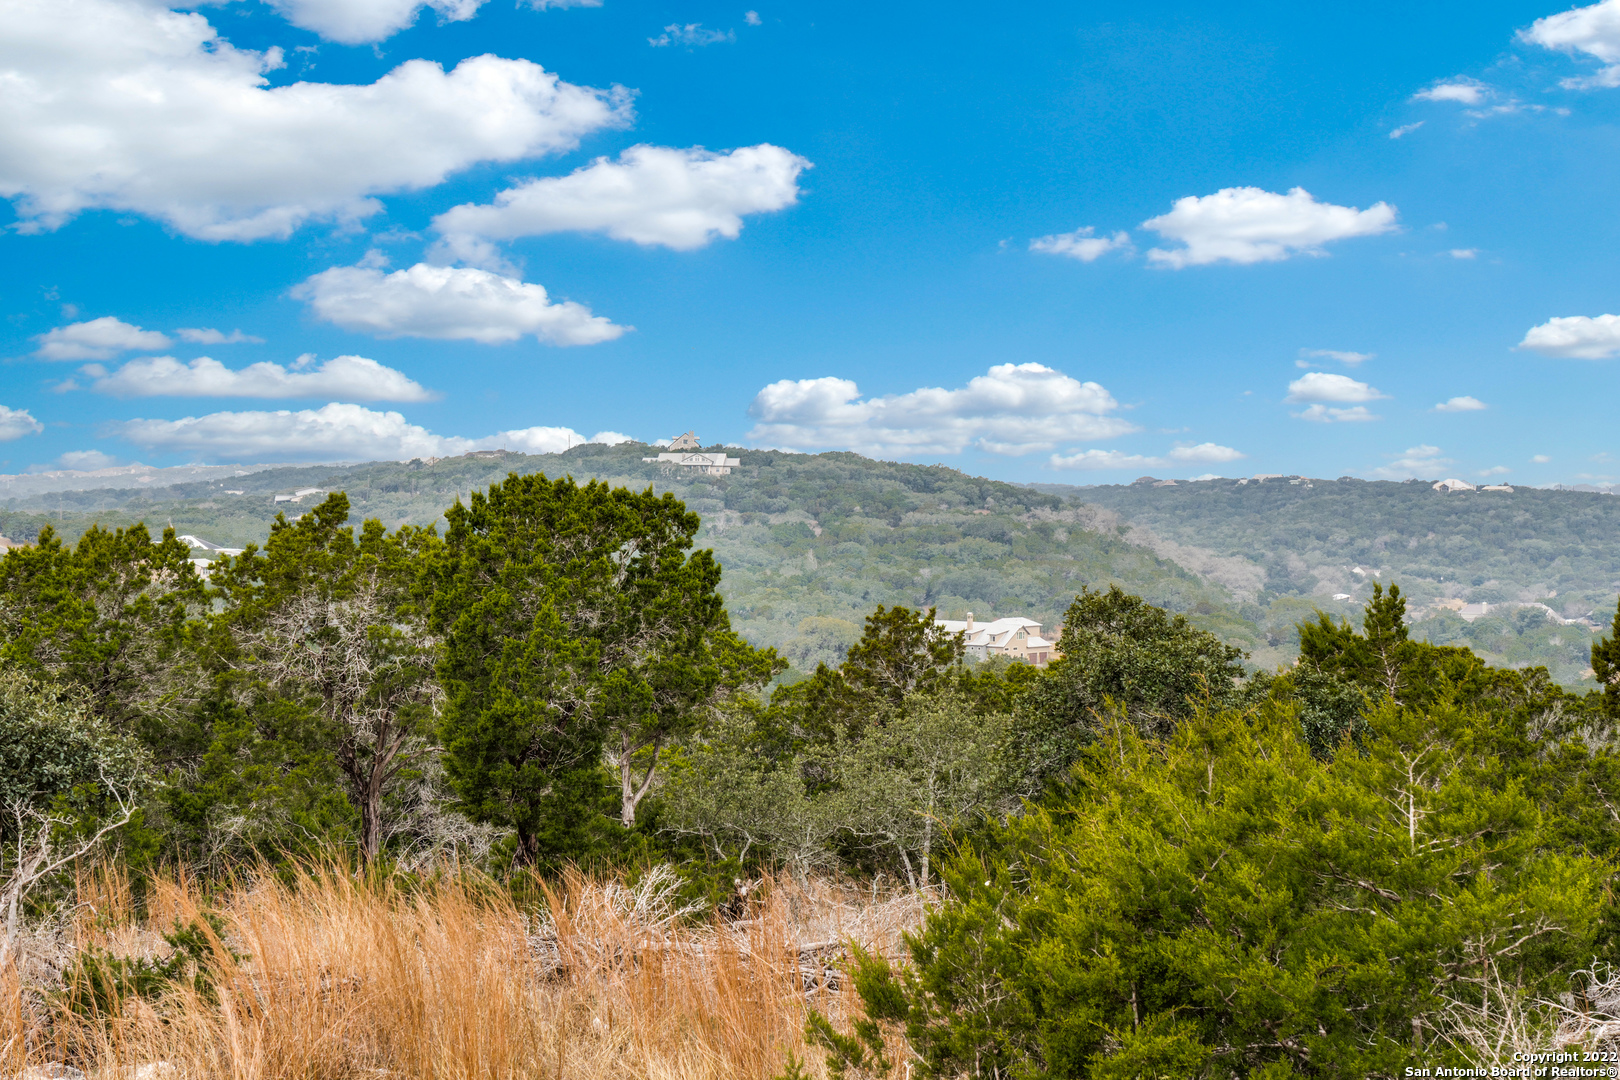 Looking for stunning Texas hill country views and a location to build your dream home? Look no further! This location has it all. Whether you're looking for a permanent residence or a weekend retreat, 4486 Laurie Michelle Road is minutes away from city living yet secluded from the hustle and bustle. This property offers approximately 25 acres. The possibilities are endless. With gorgeous sunsets right at your fingertips, bring your thinking cap and see this property for yourself.